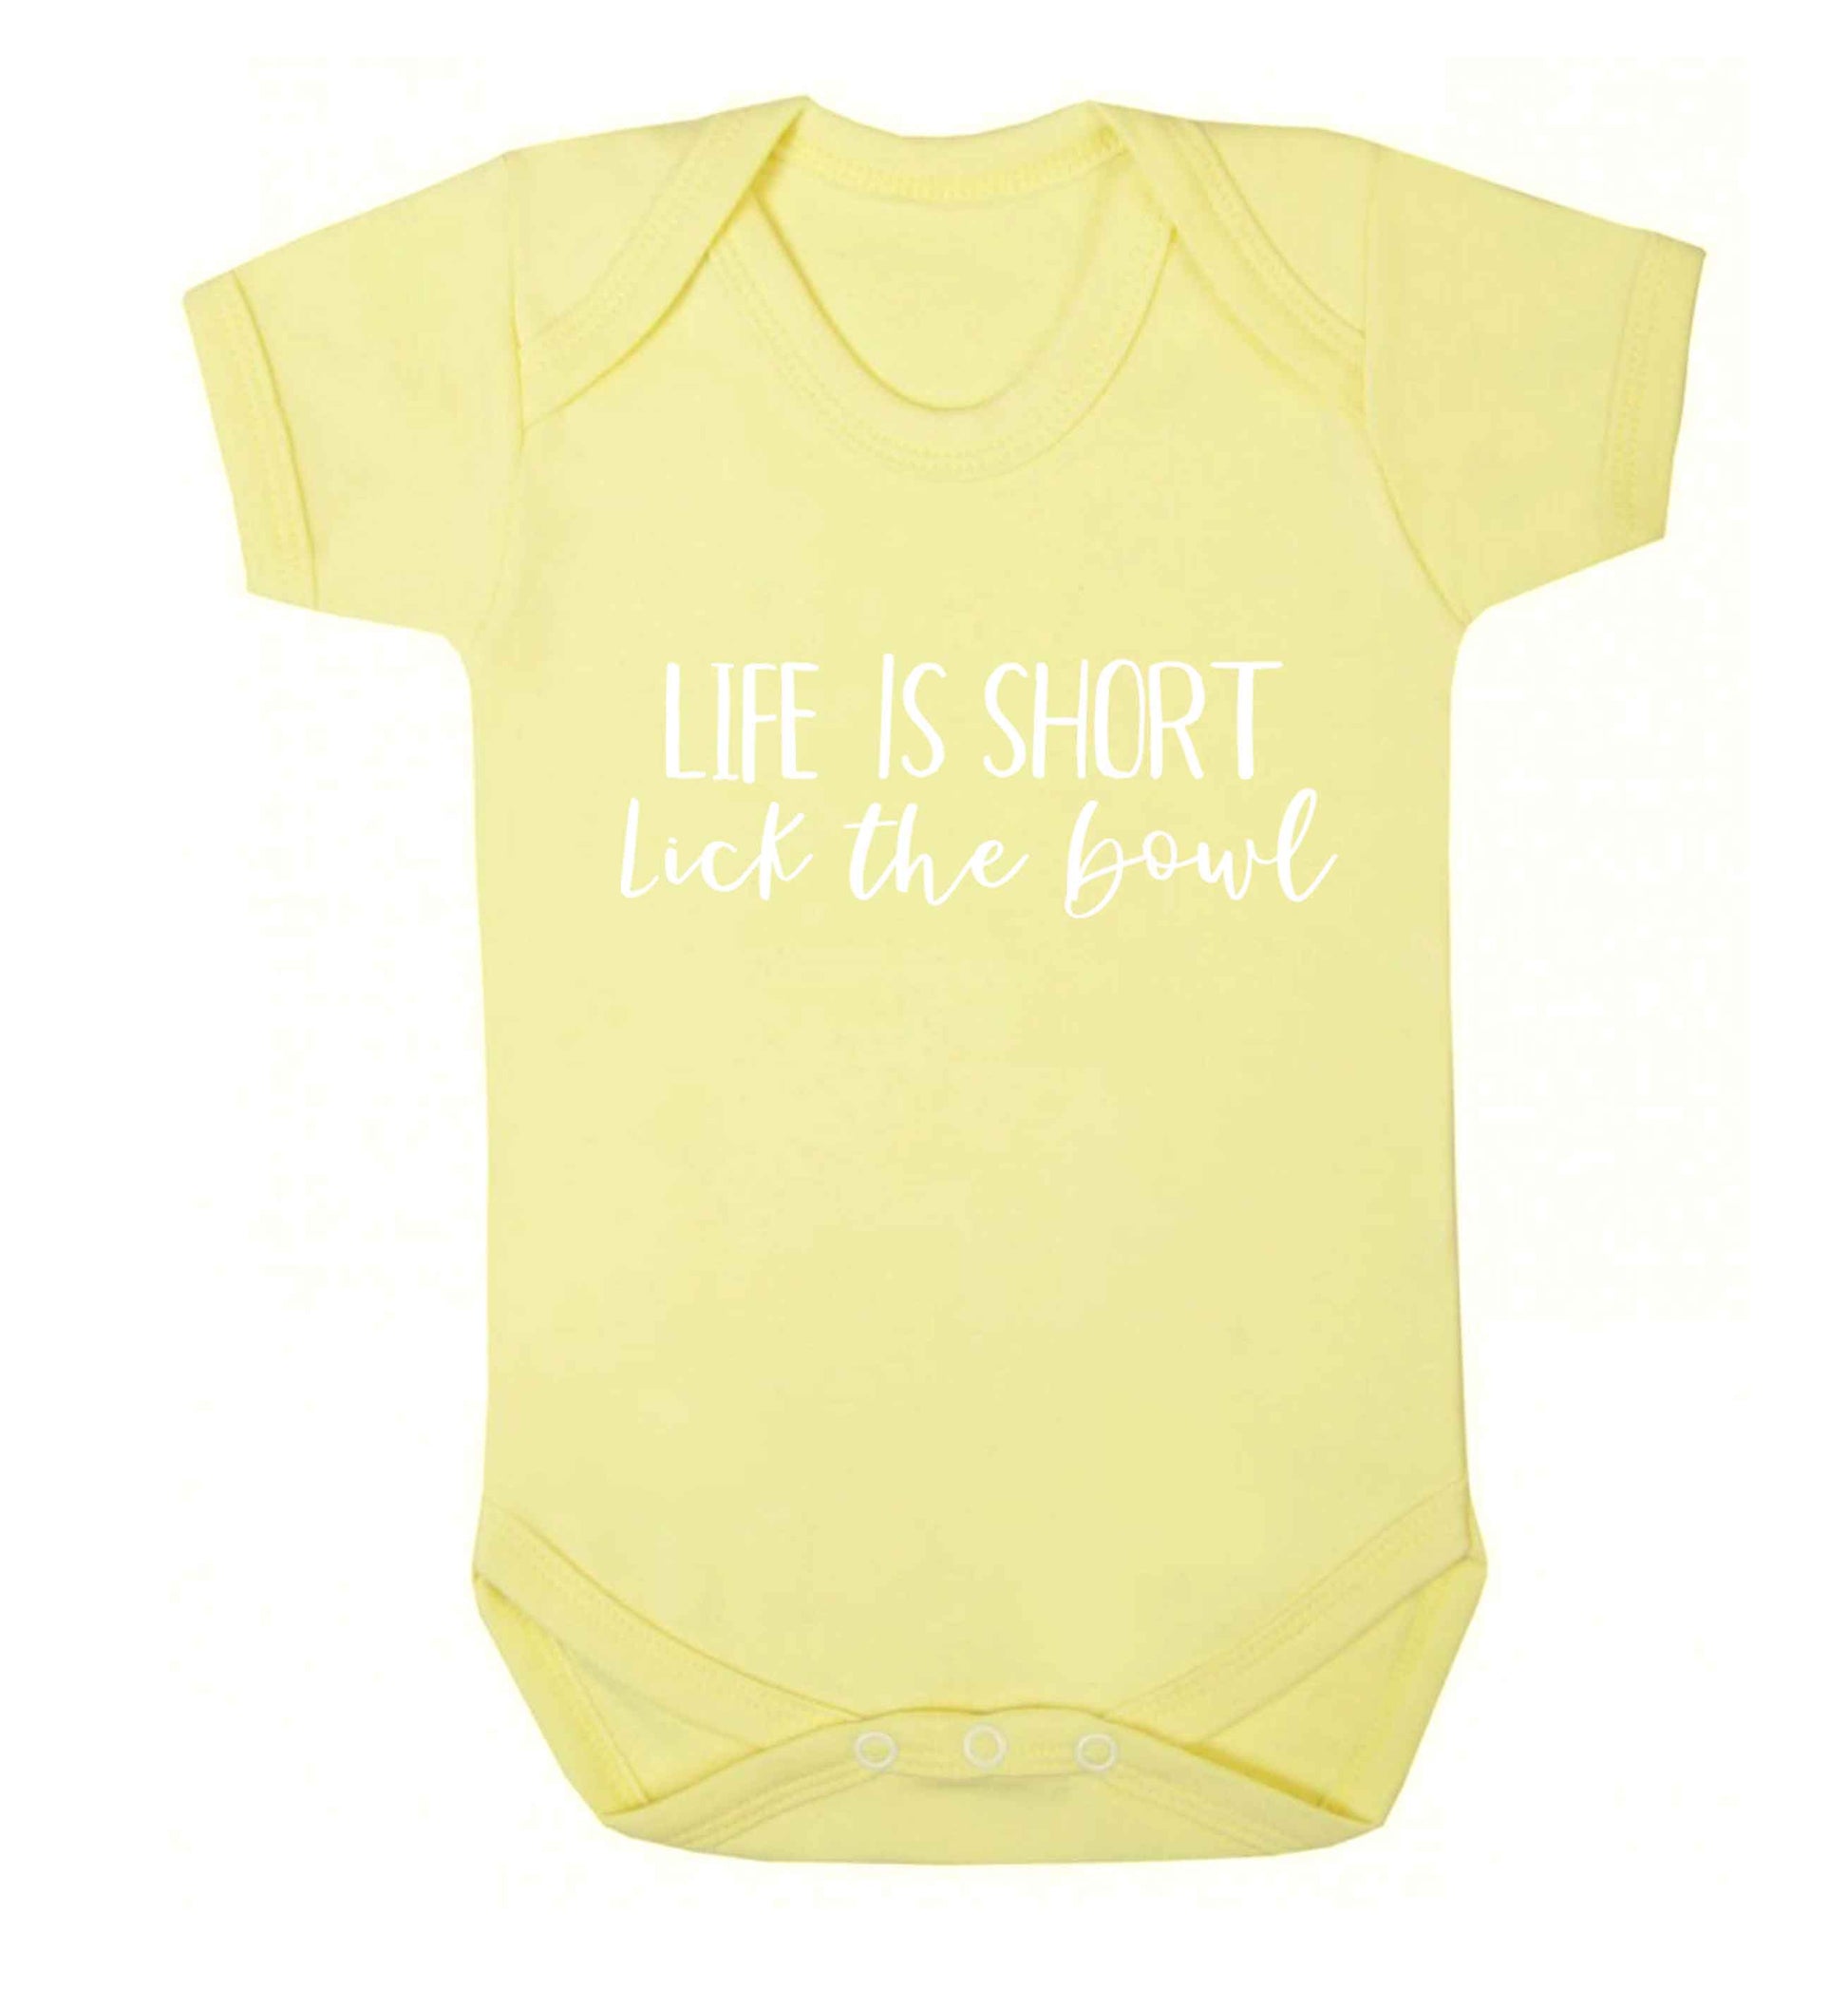 Life is short lick the bowl Baby Vest pale yellow 18-24 months